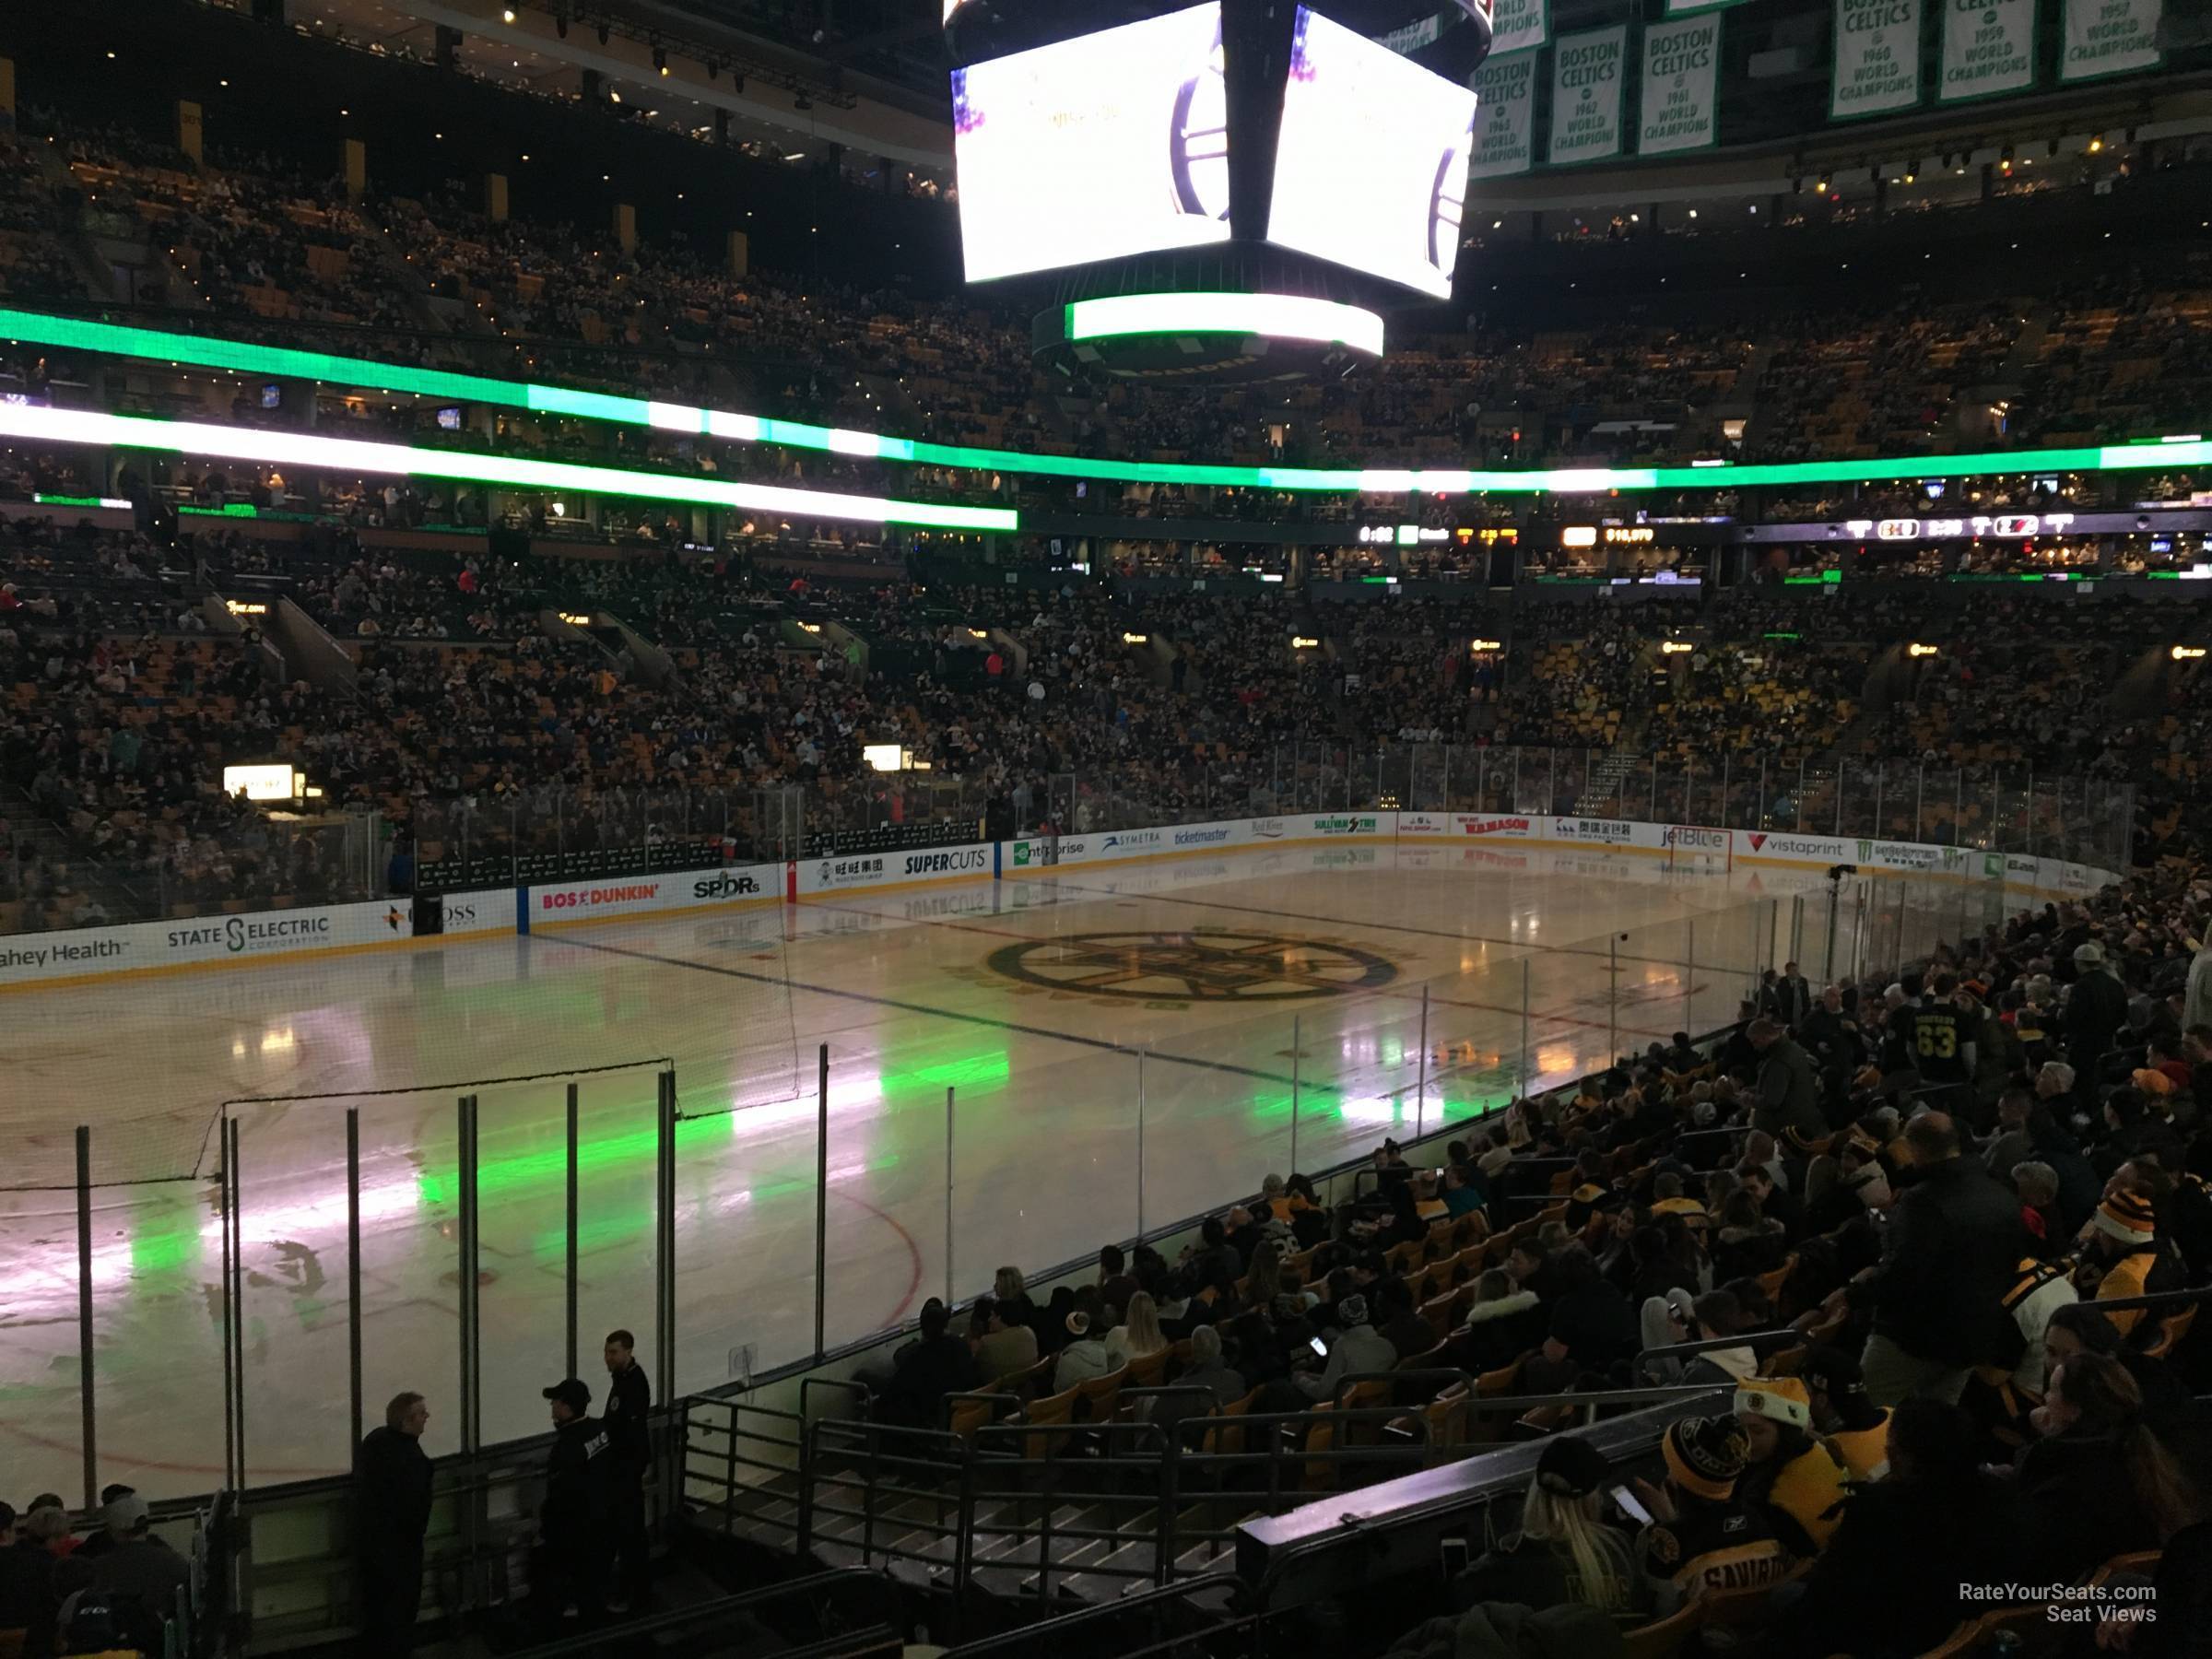 Best way to get front row seats? : r/BostonBruins